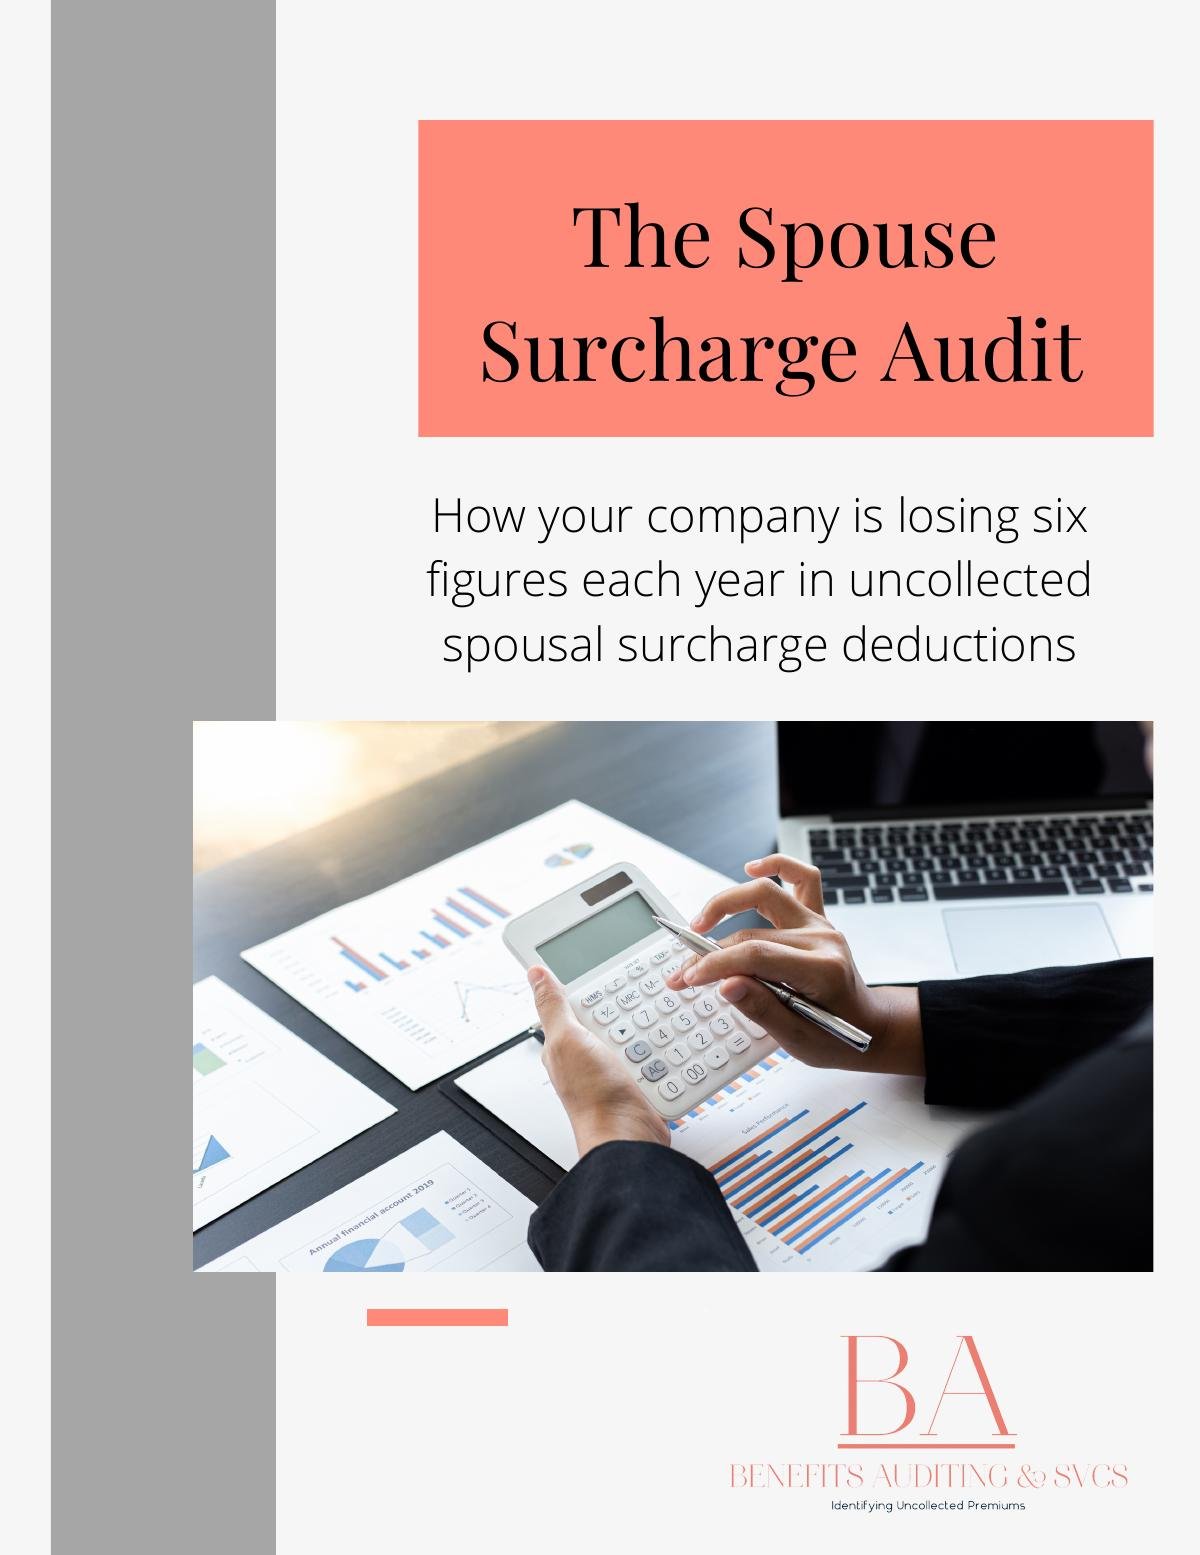 The importance of a spouse surcharge audit